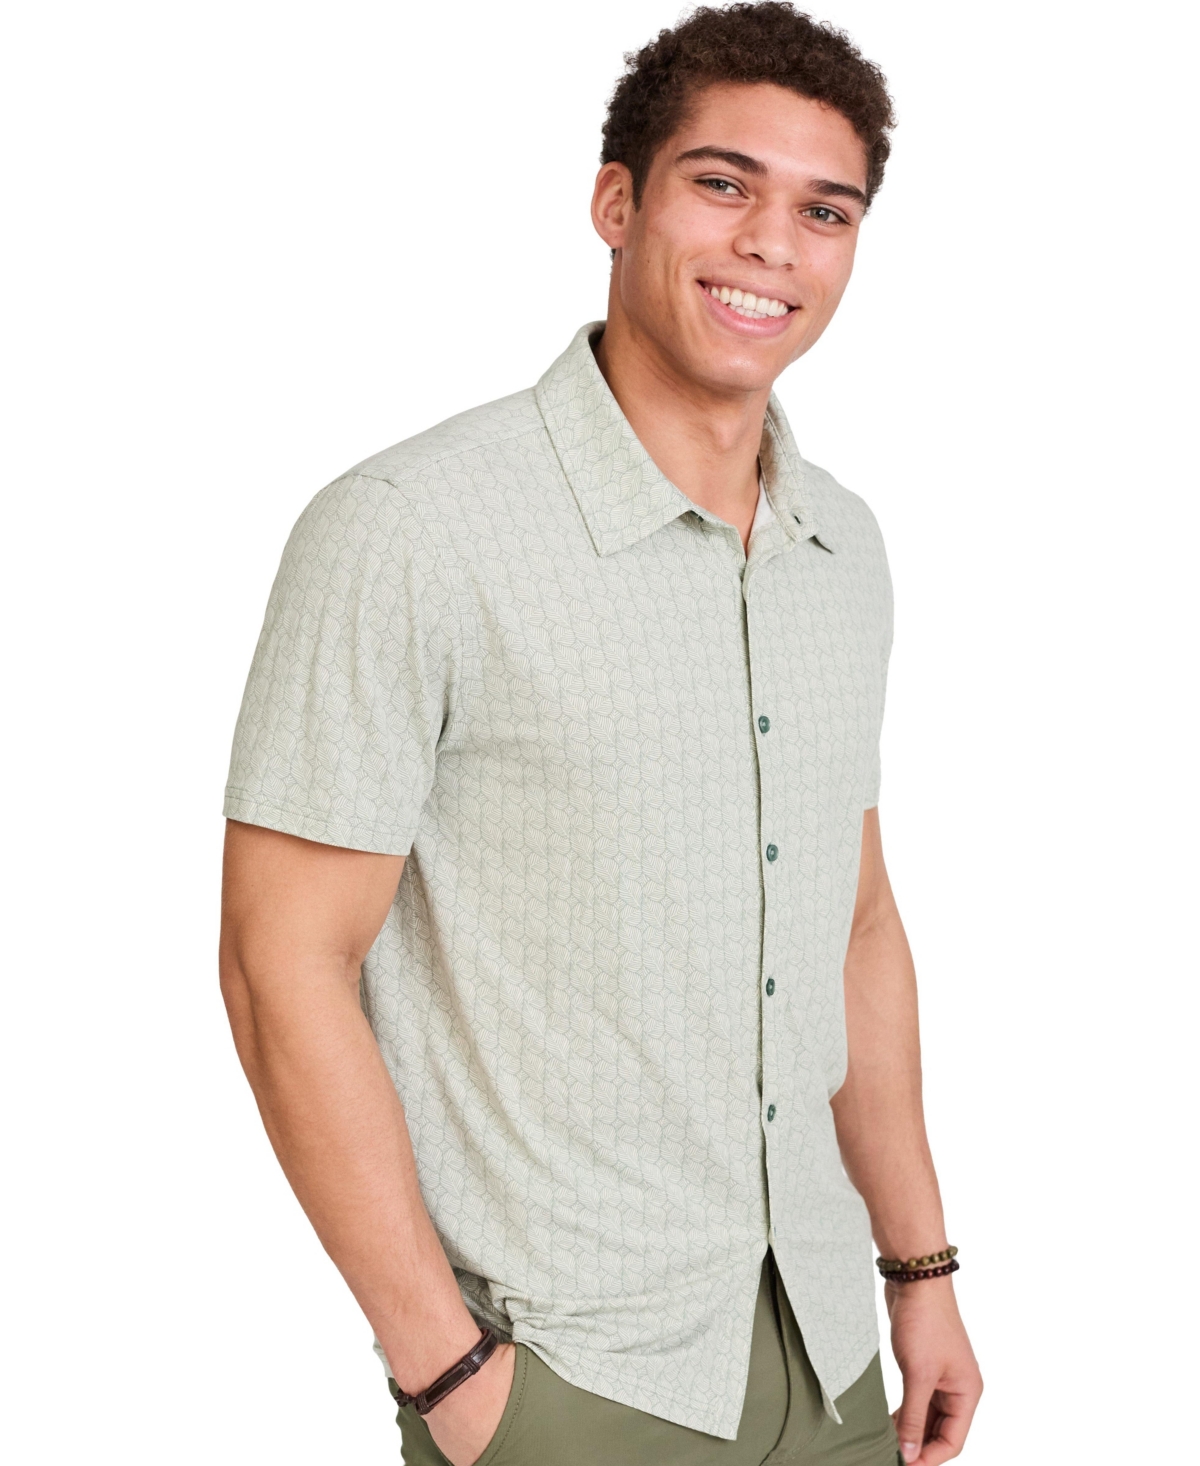 Men's Elm Short Sleeve Button Up Shirt - Chinois green leaves